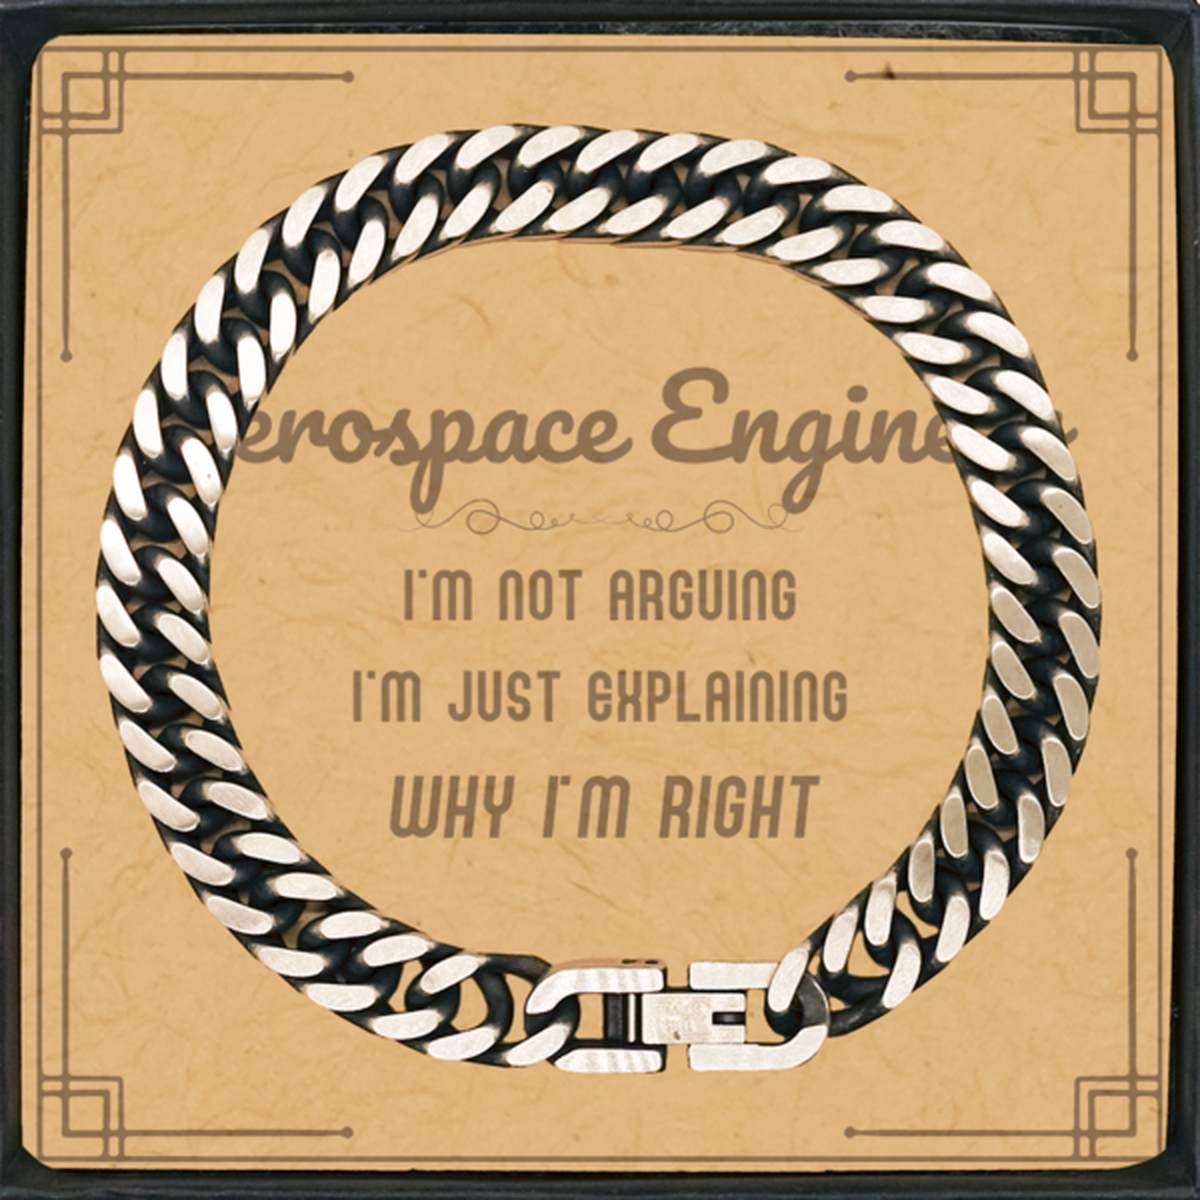 Aerospace Engineer I'm not Arguing. I'm Just Explaining Why I'm RIGHT Cuban Link Chain Bracelet, Funny Saying Quote Aerospace Engineer Gifts For Aerospace Engineer Message Card Graduation Birthday Christmas Gifts for Men Women Coworker